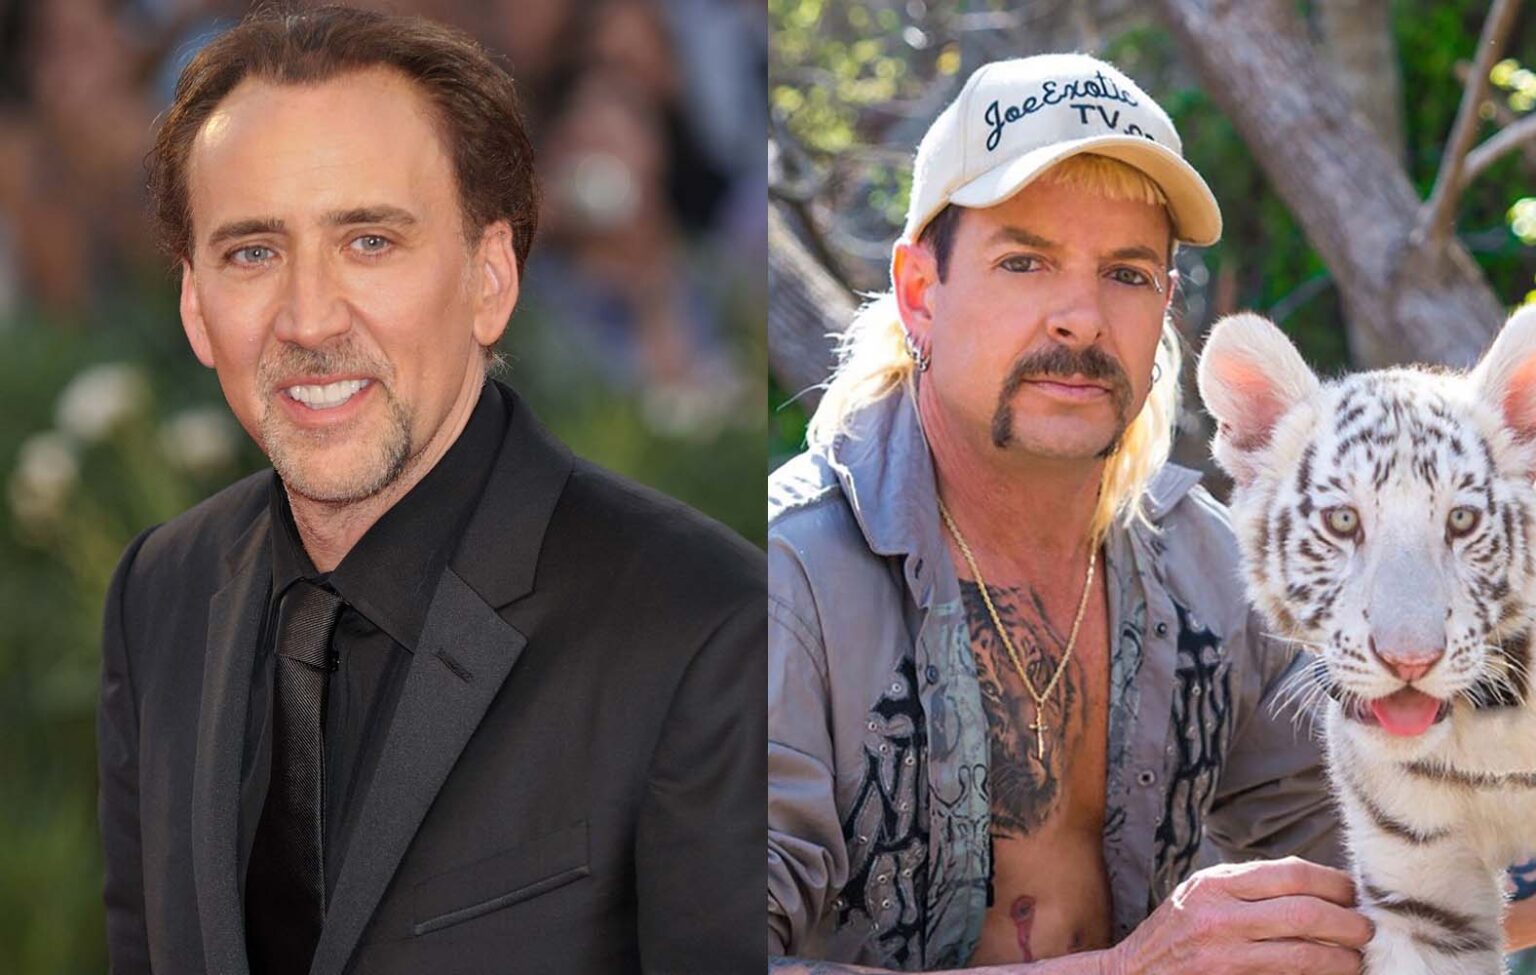 Nicolas Cage will play Joe Exotic in the upcoming scripted series based on 'Tiger King'. Here are some hilarious memes to celebrate the occasion.